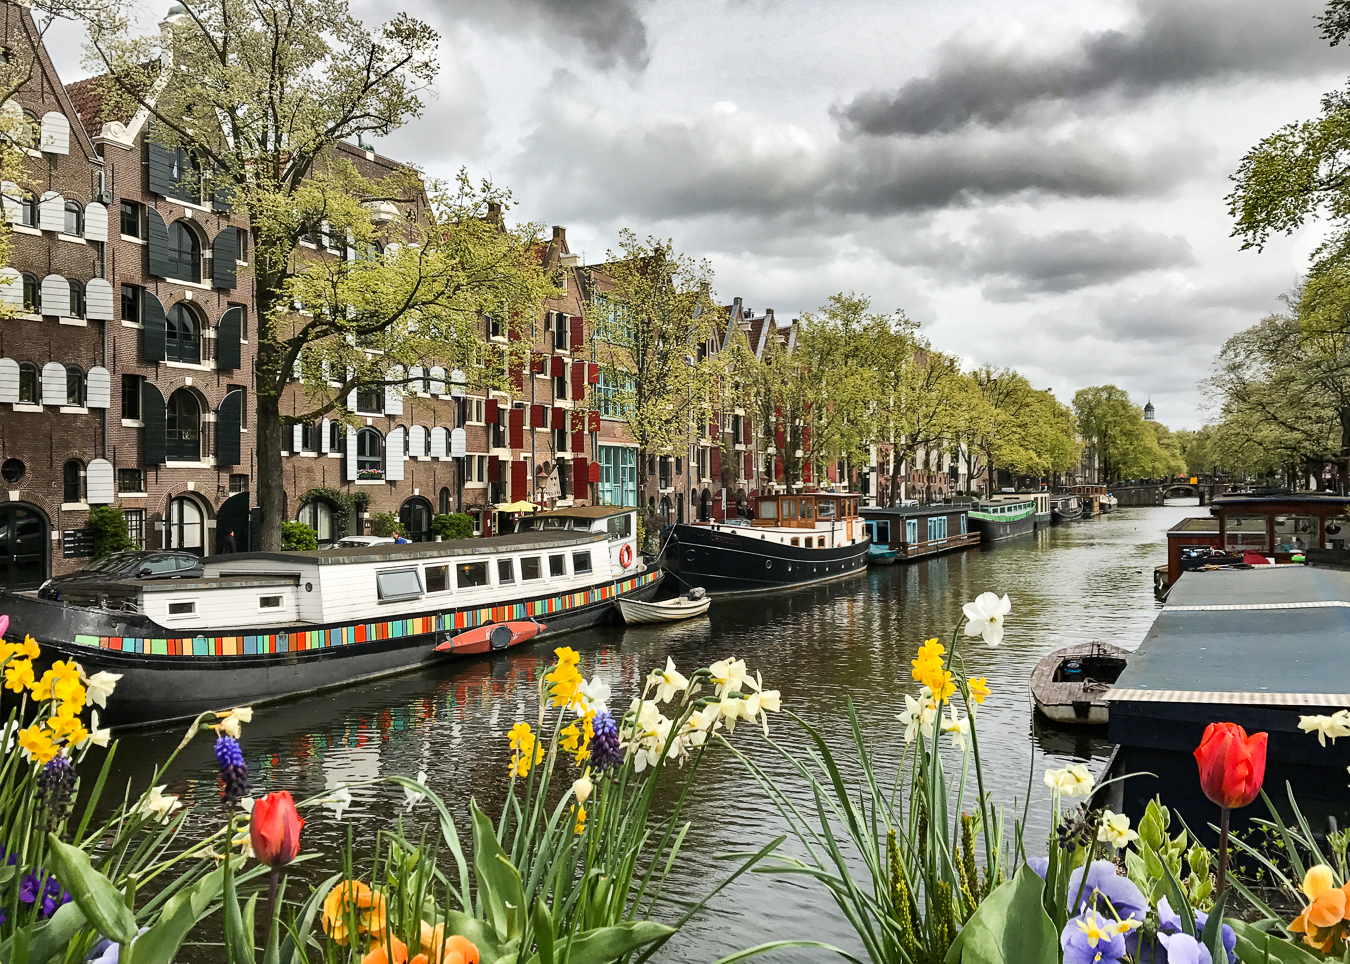 Guide to See 17th-Century Canal Rings in Amsterdam - Global Heritage Travel